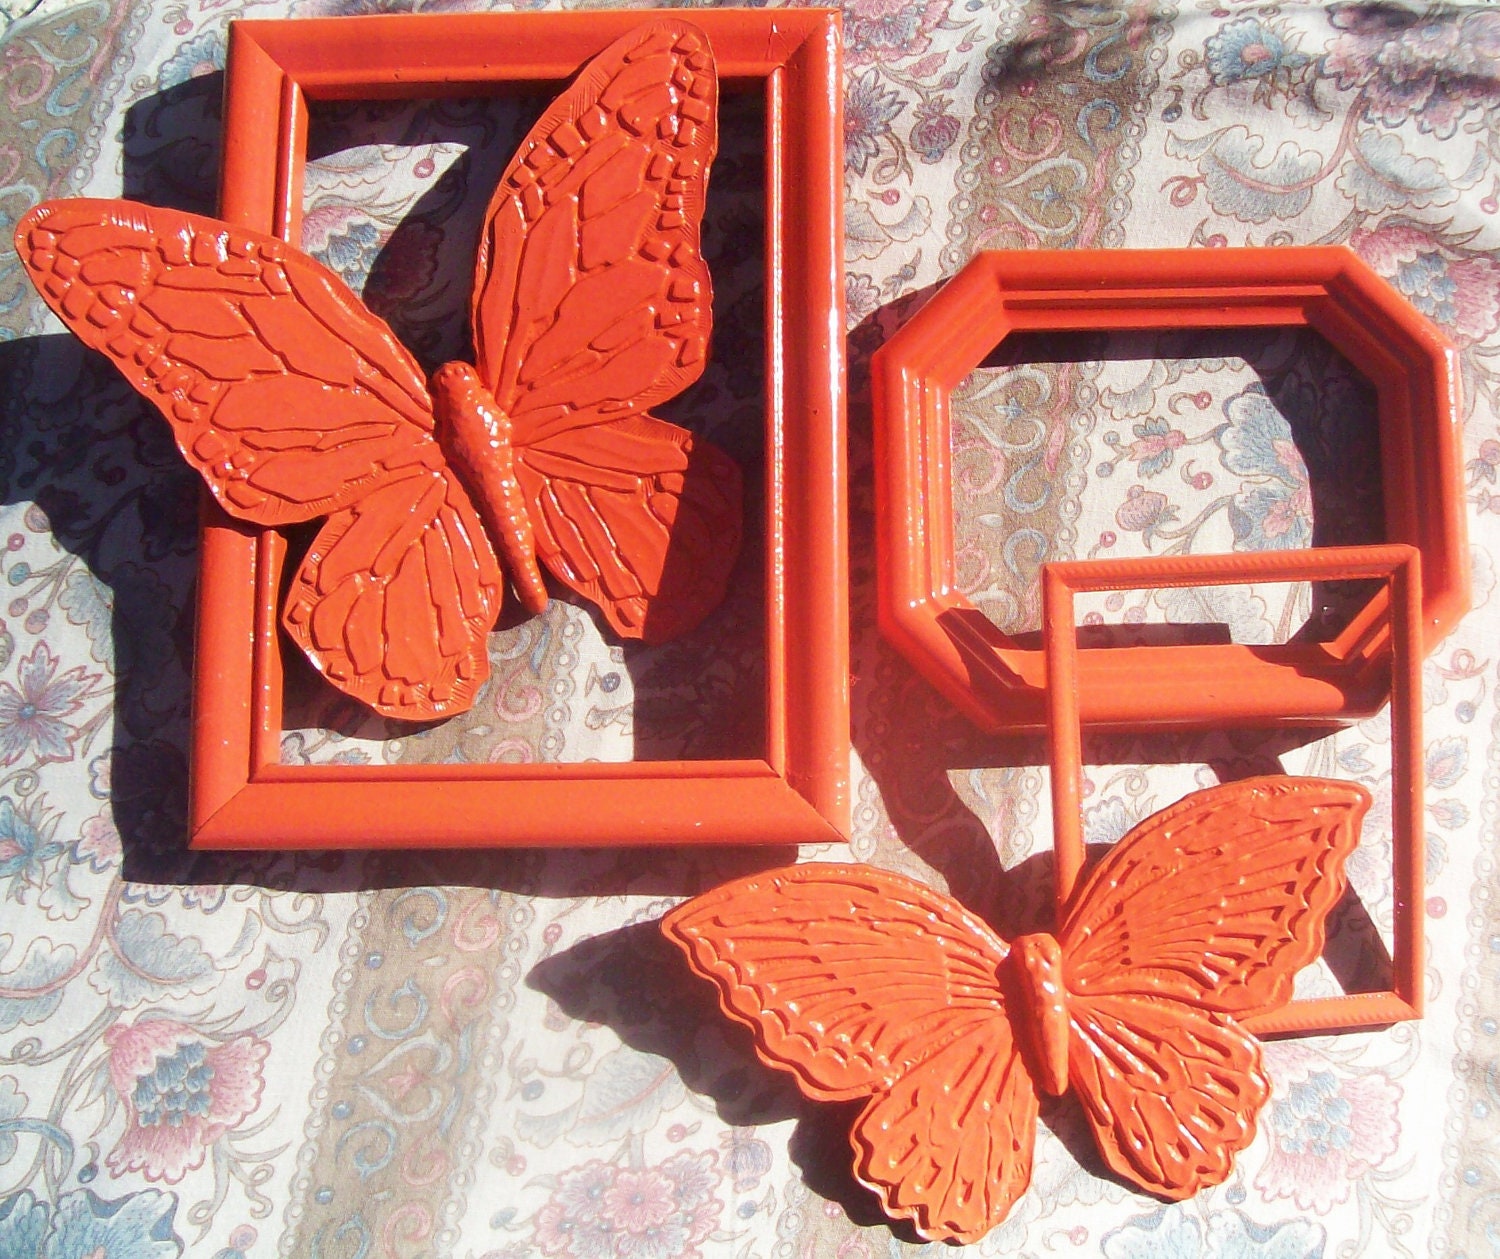 Retro orange picture frames set of 3 with matching orange butterflies set of 2 upcycled recycled painted